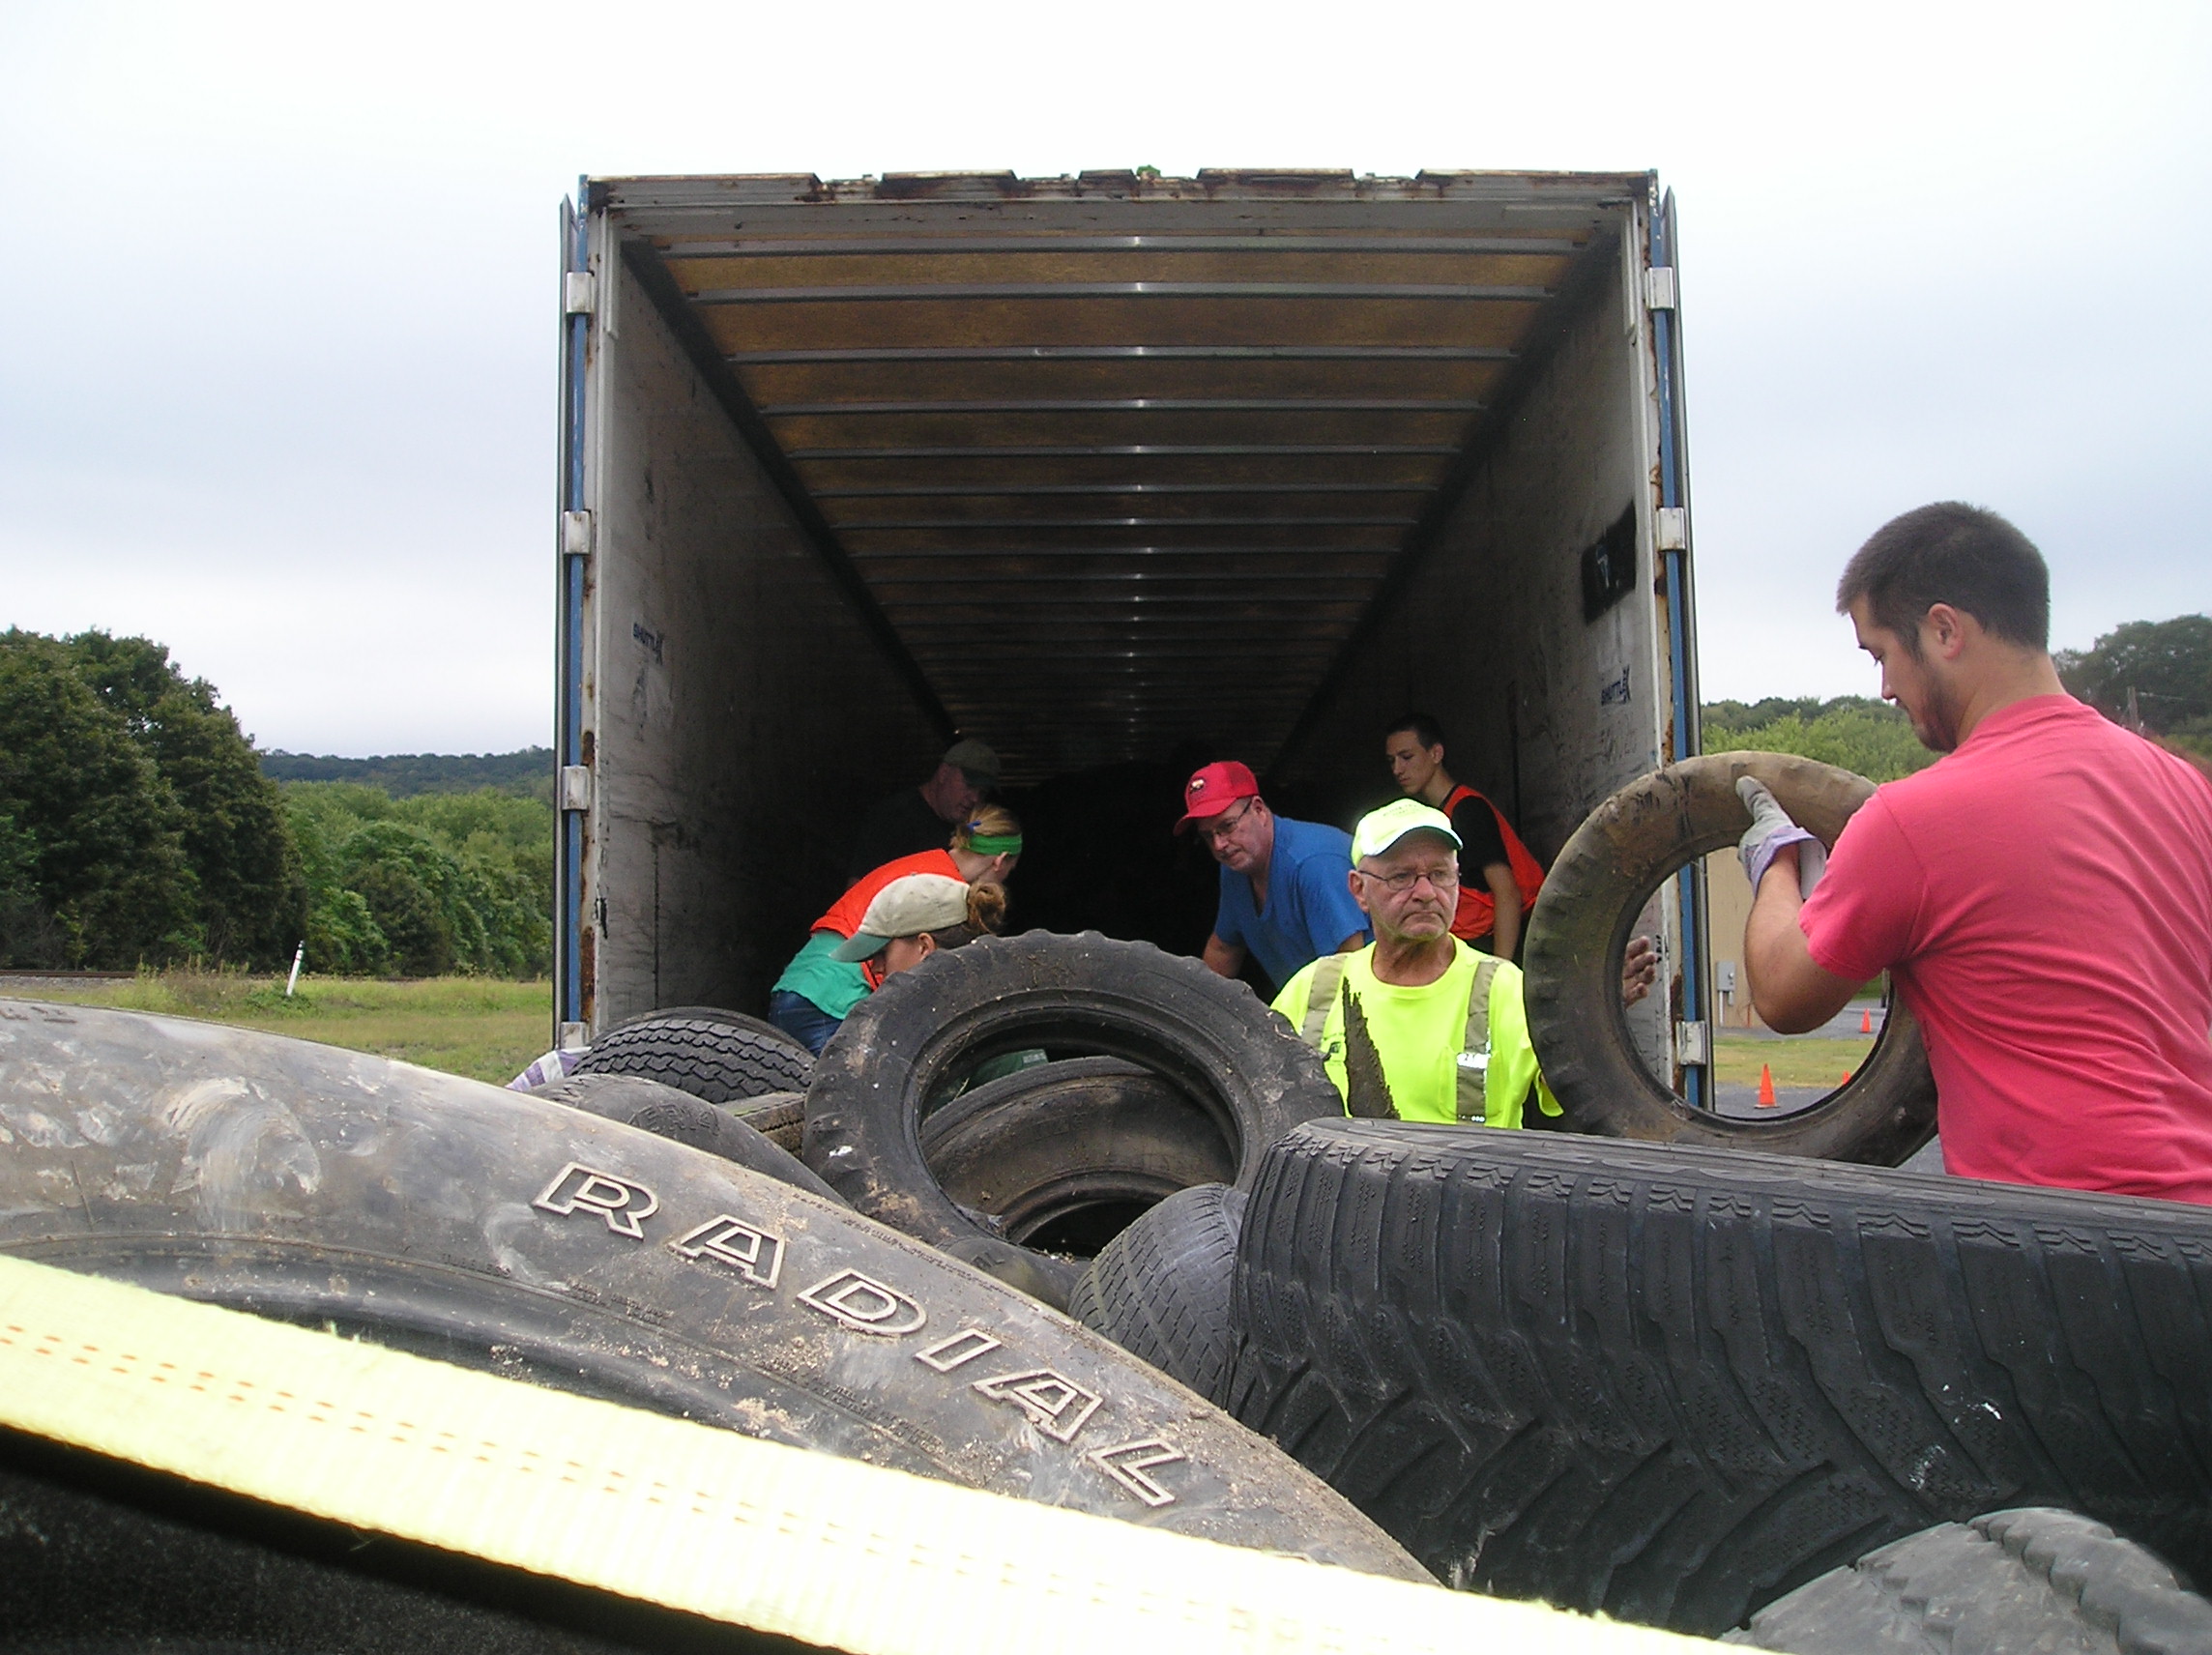 Men loading tires into a truck